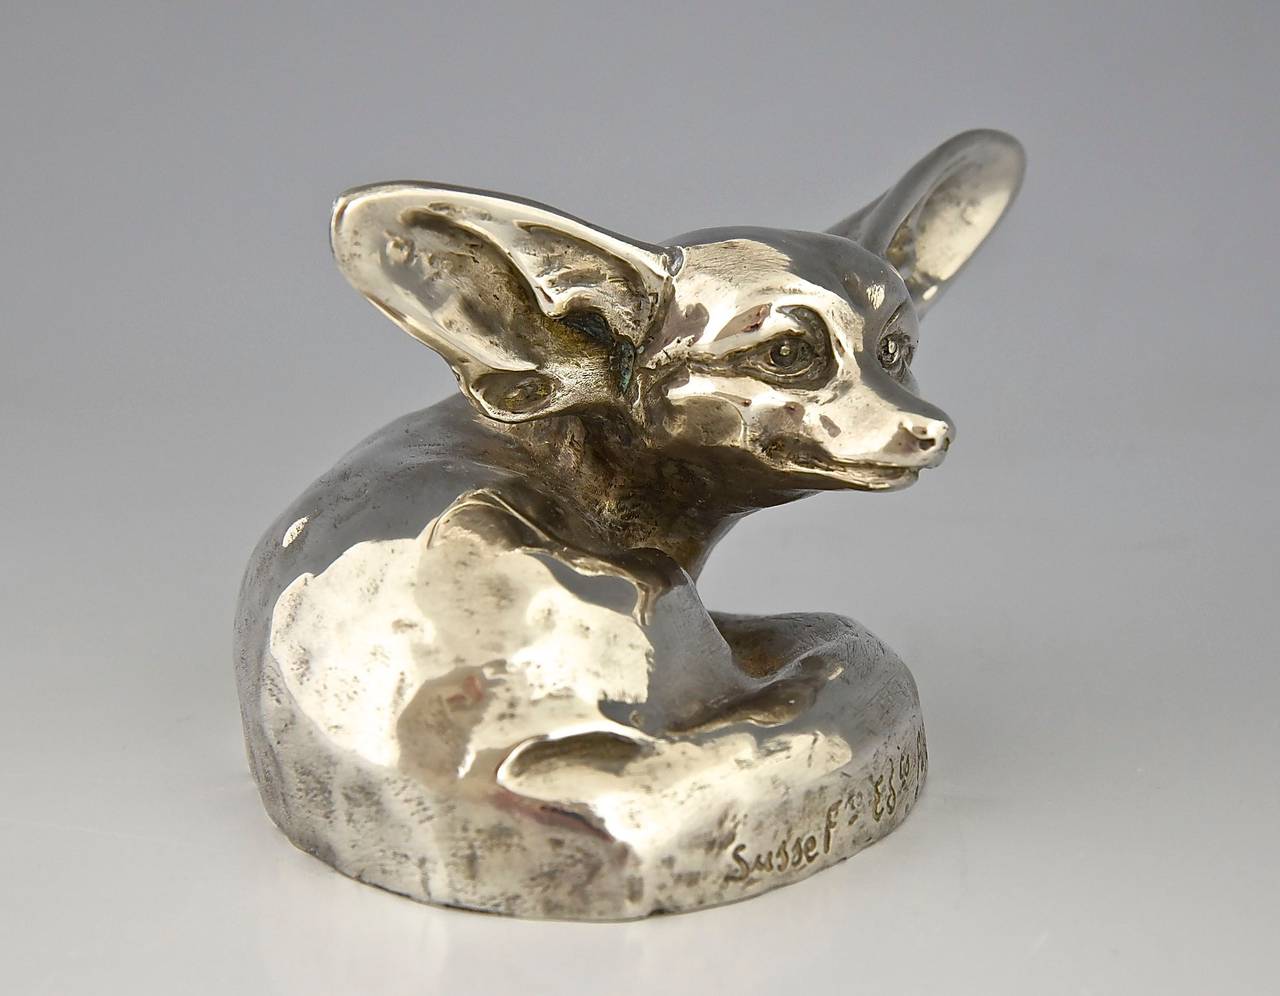 Art Deco bronze sculpture of a fennec or desert fox. 
By Edouard-Marcel Sandoz (1881-1973).
Signature and marks:  Ed.M. Sandoz , Susse Frères Ed, Susse Frères foundry seal.  
Style:  Art Deco. 
Date:  1920.
Material:  Silvered bronze. 
Origin: